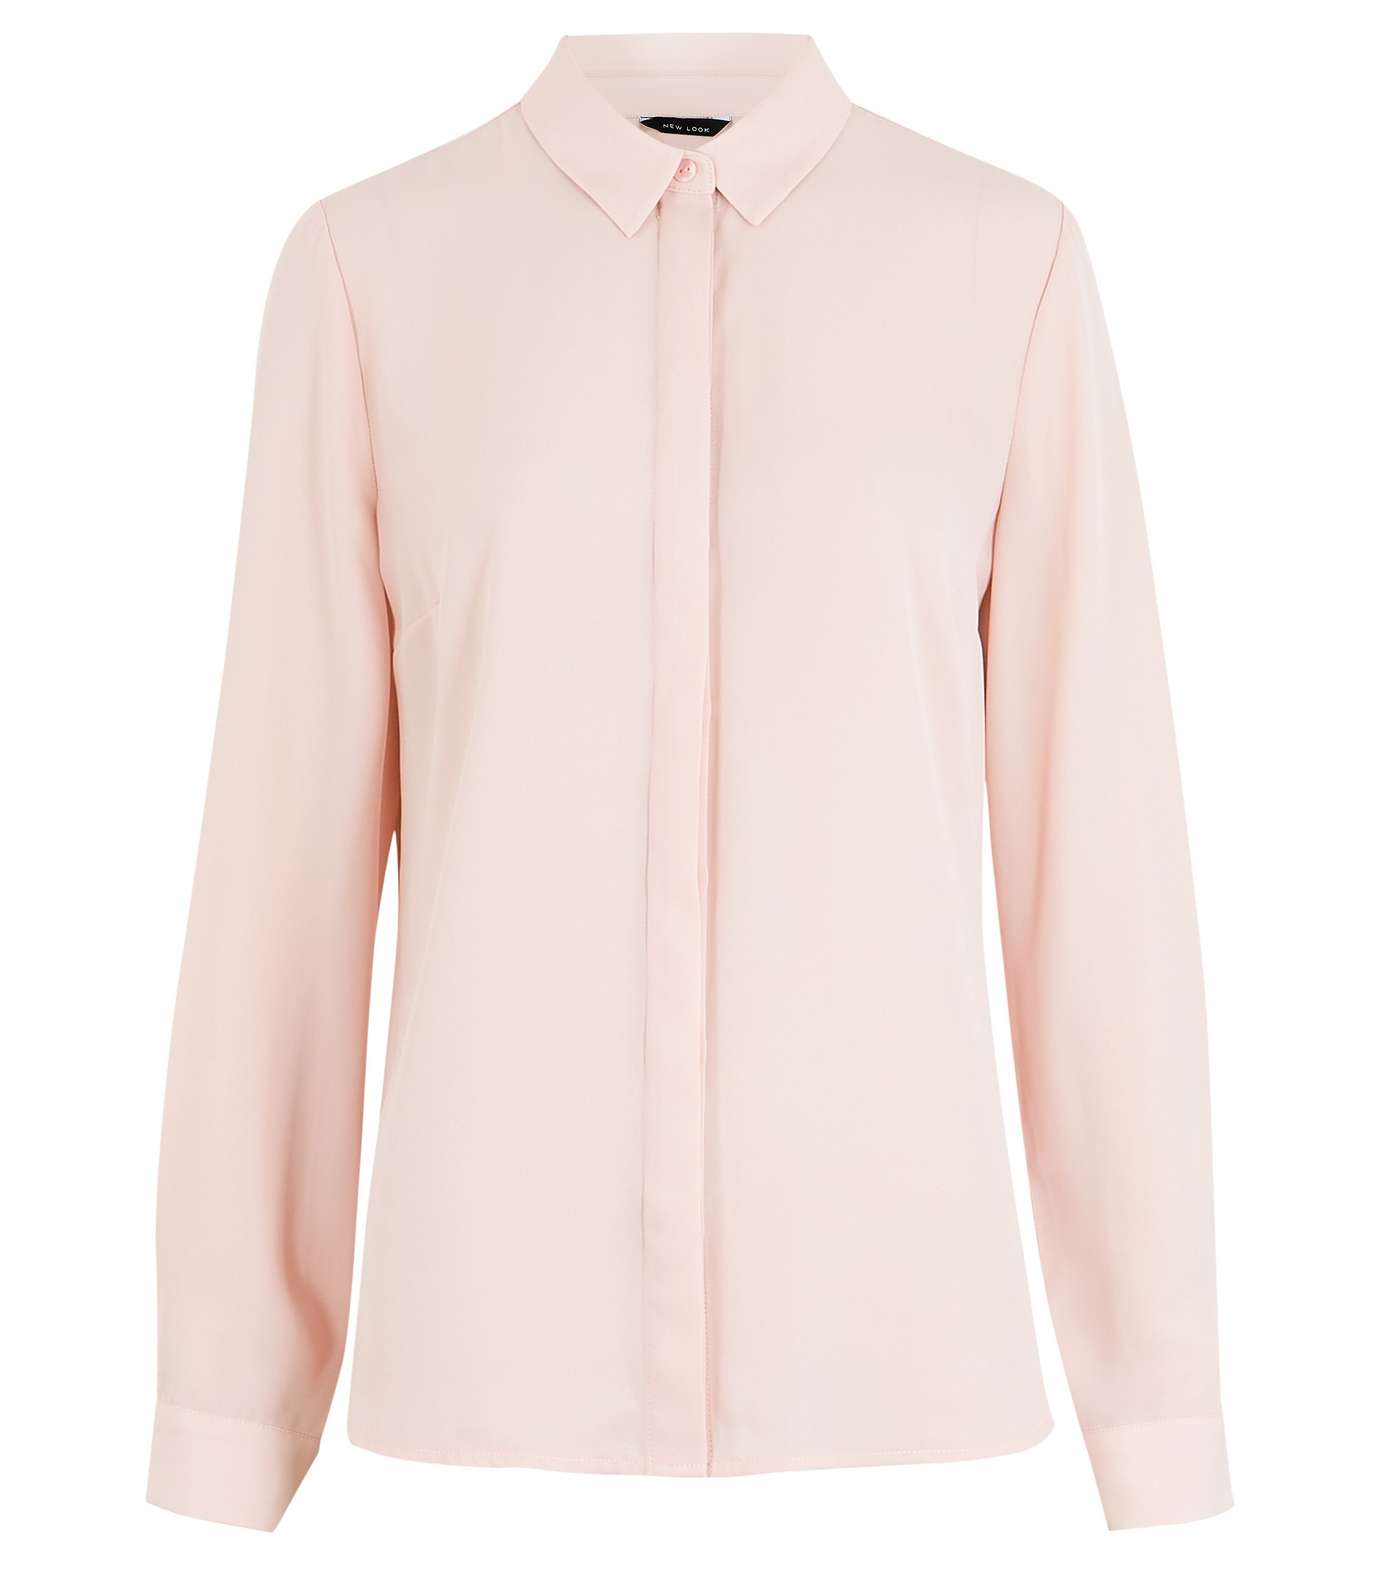 Pale Pink Long Sleeve Button Up Shirt